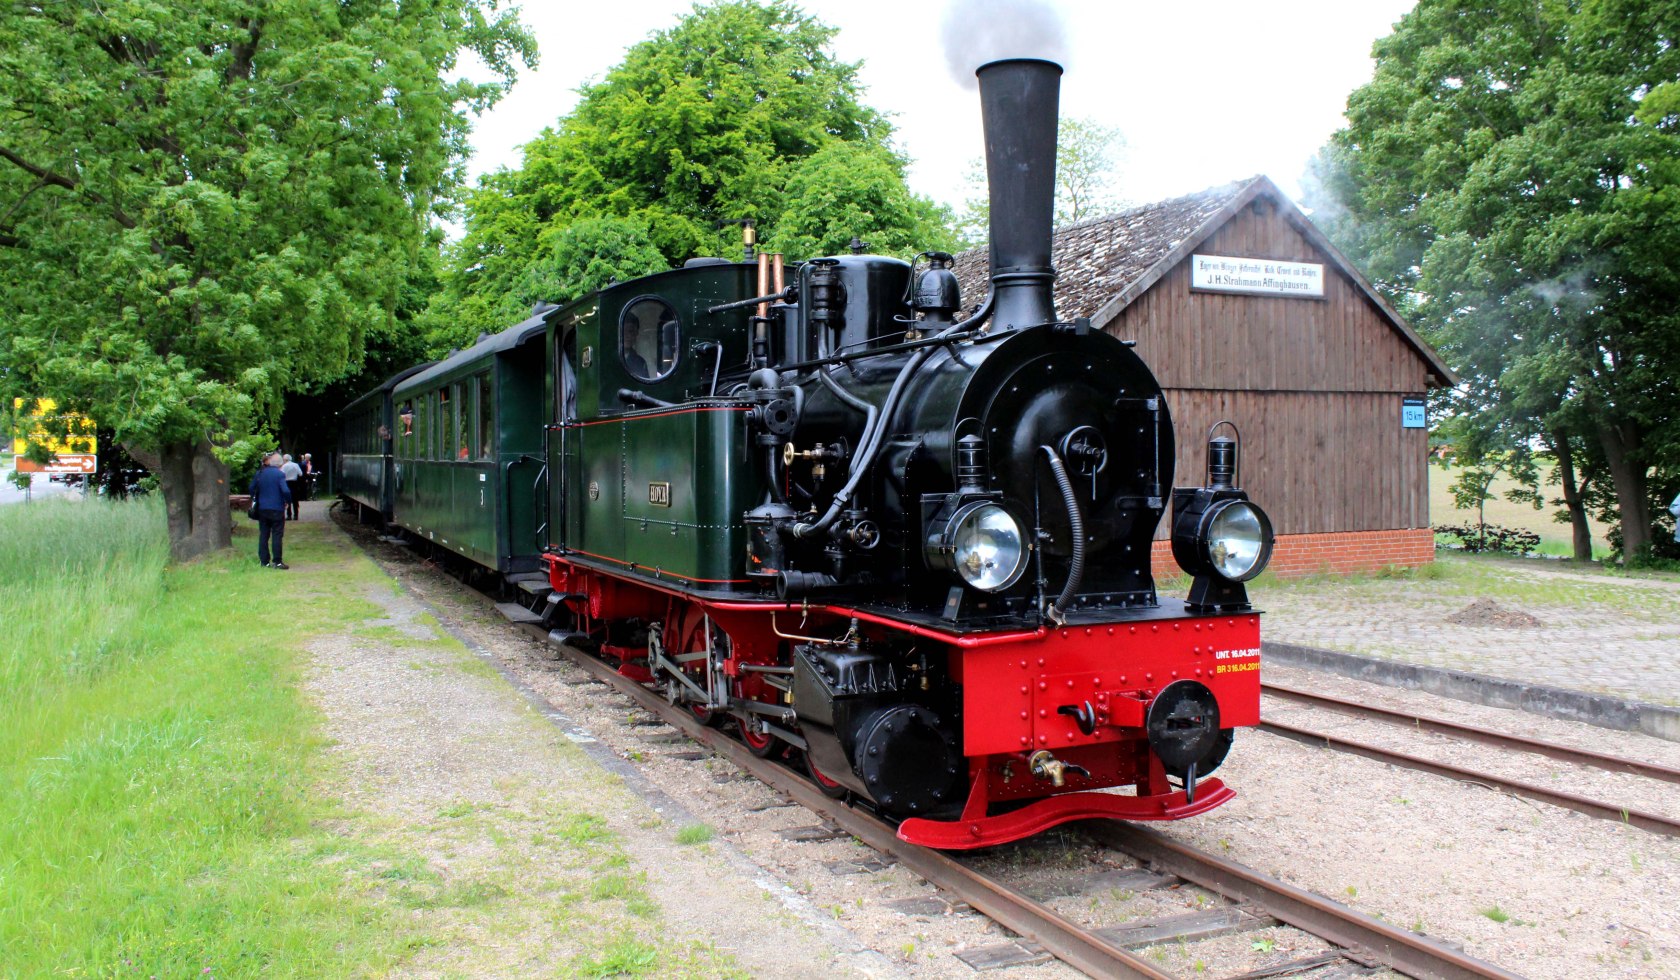 An old black locomotive stands in the station., © Mittelweser-Touristik GmbH